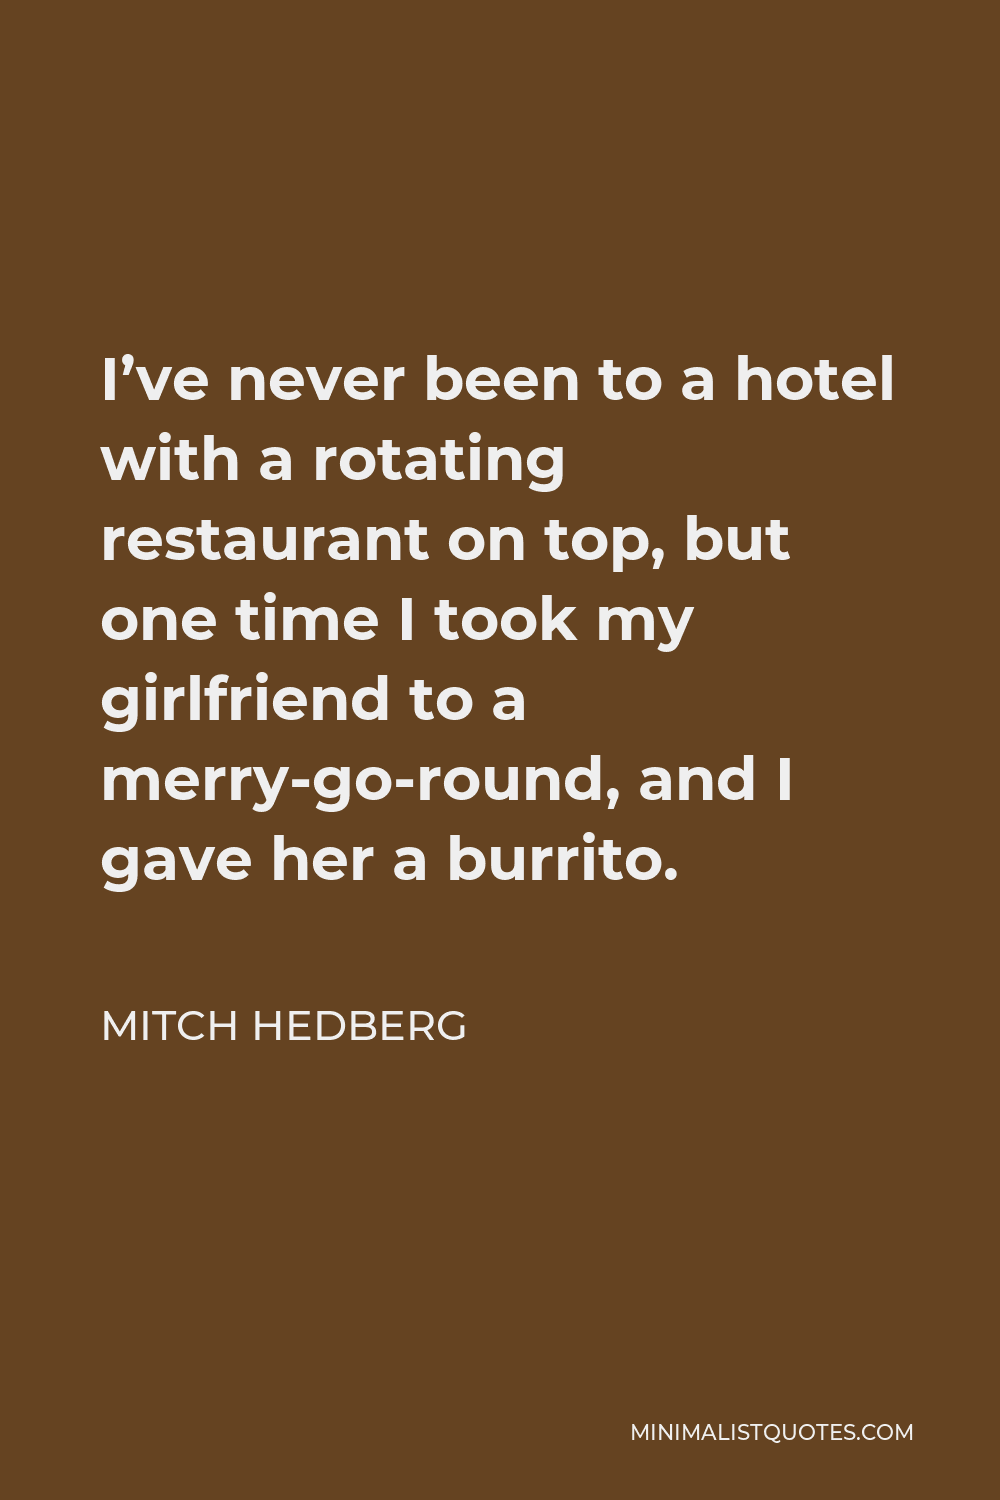 Mitch Hedberg Quote - I’ve never been to a hotel with a rotating restaurant on top, but one time I took my girlfriend to a merry-go-round, and I gave her a burrito.